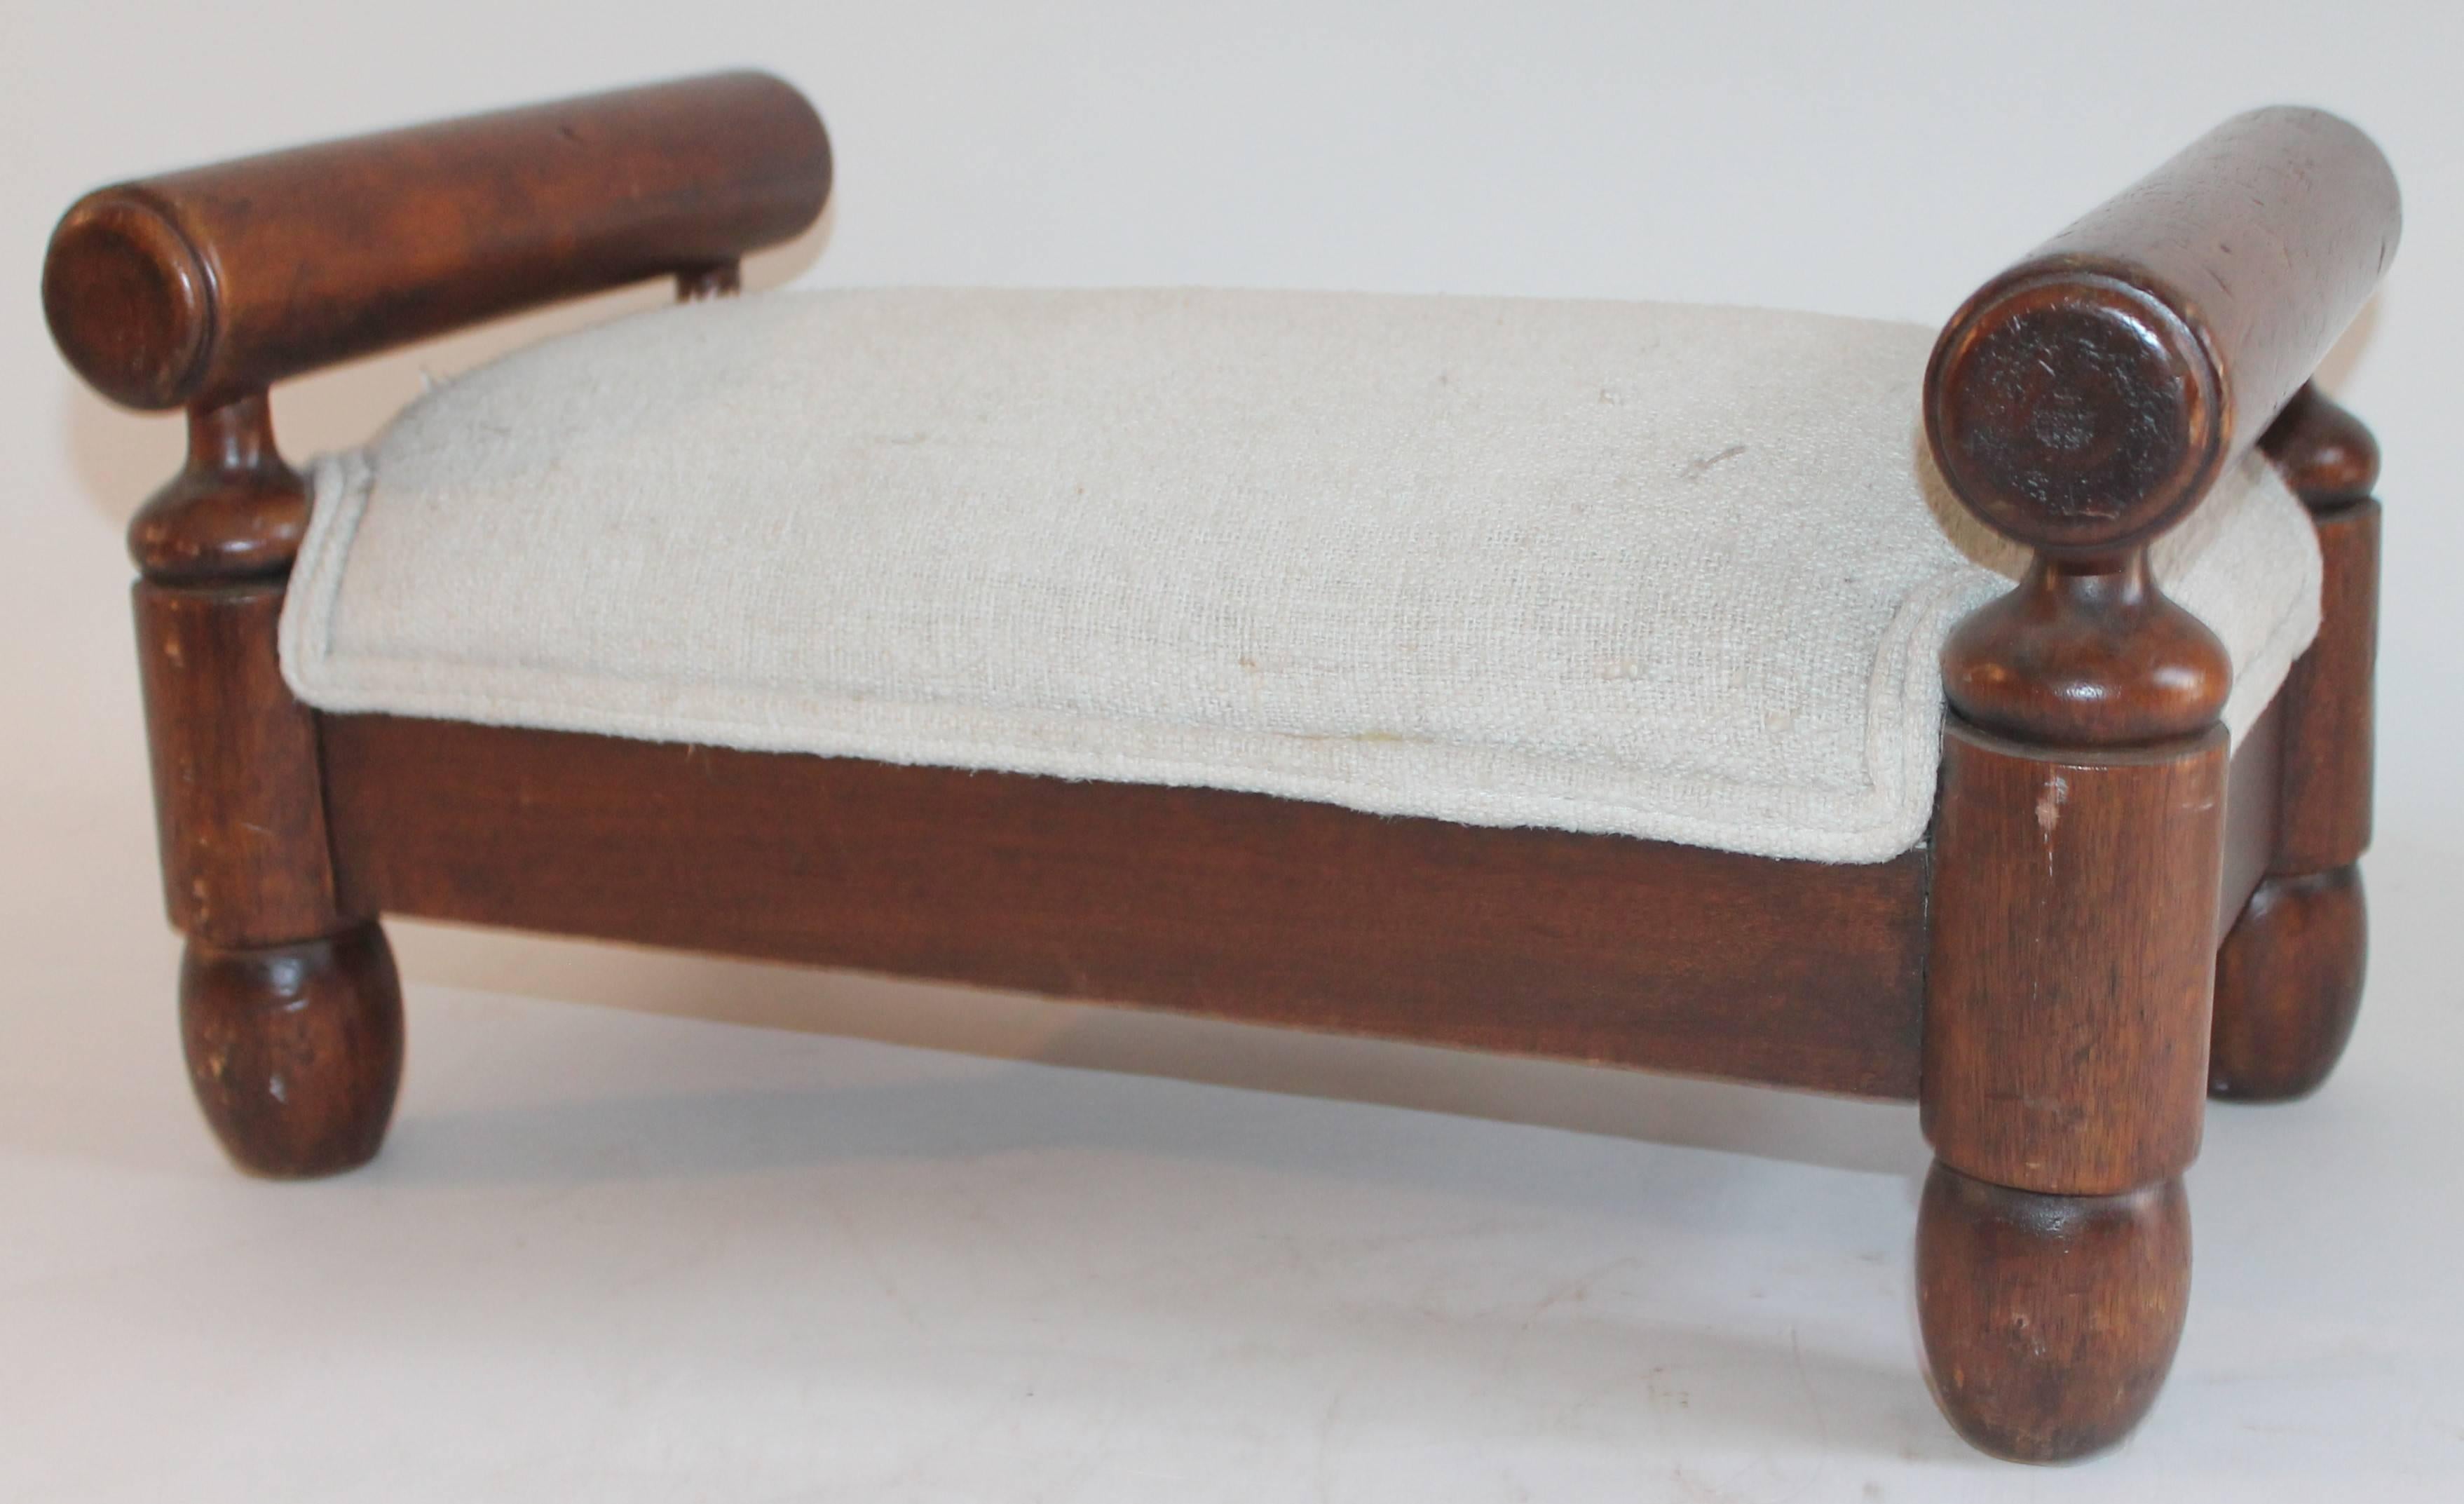 19th century handmade foot stool with homespun linen upholstery. This stool is in pristine condition.